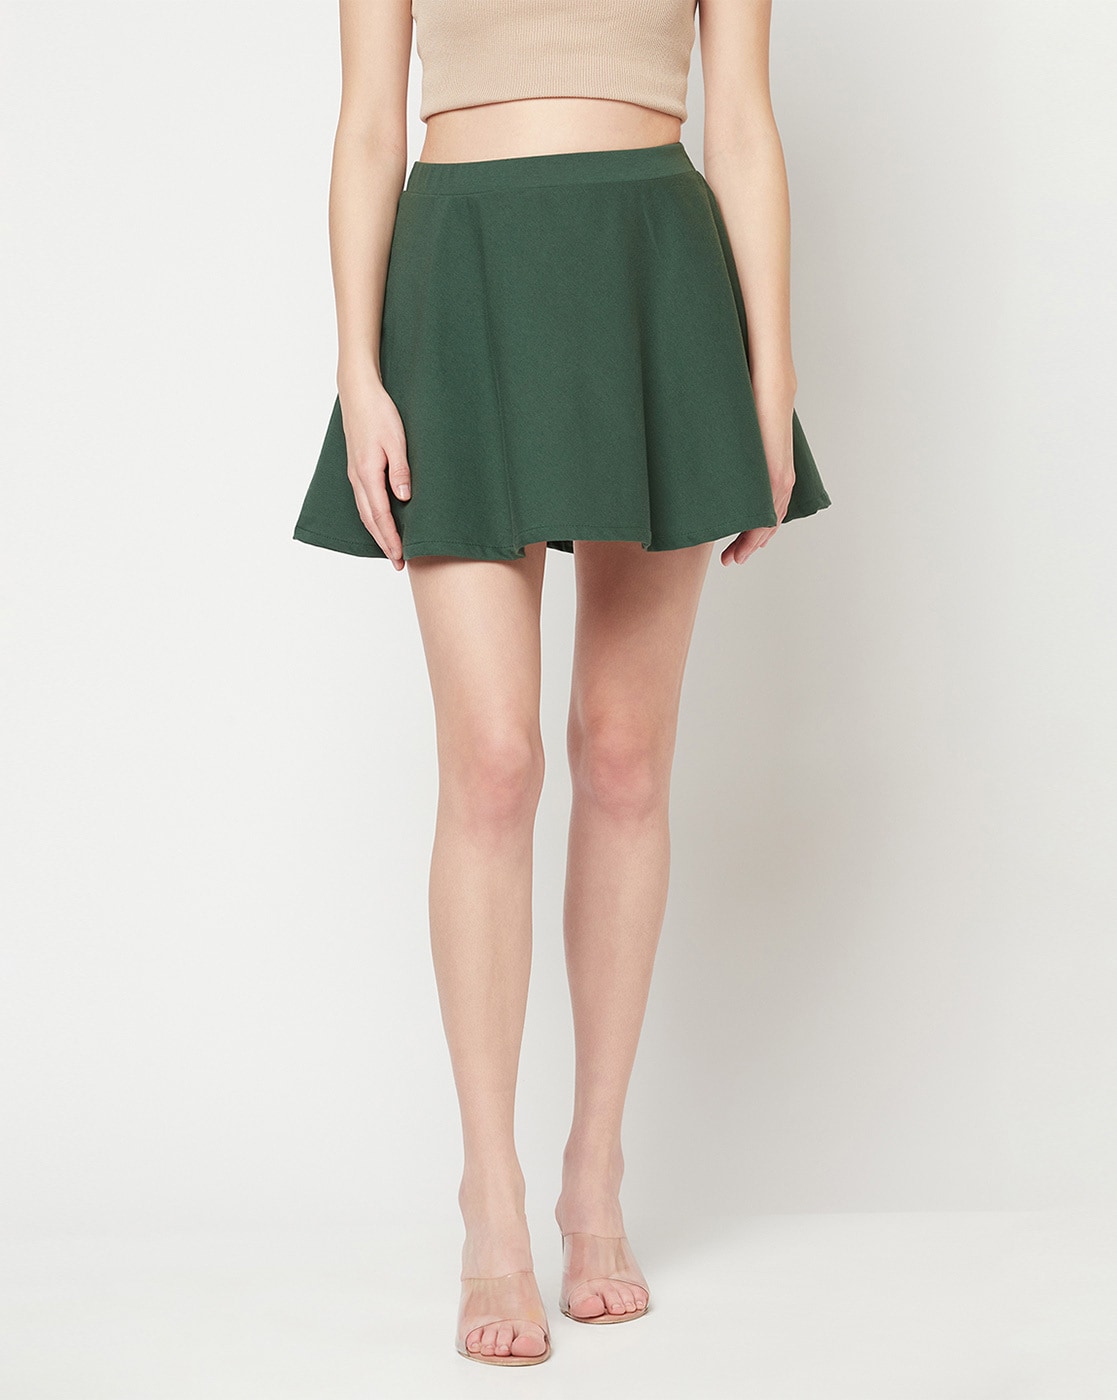 Collection 142+ green skirt latest